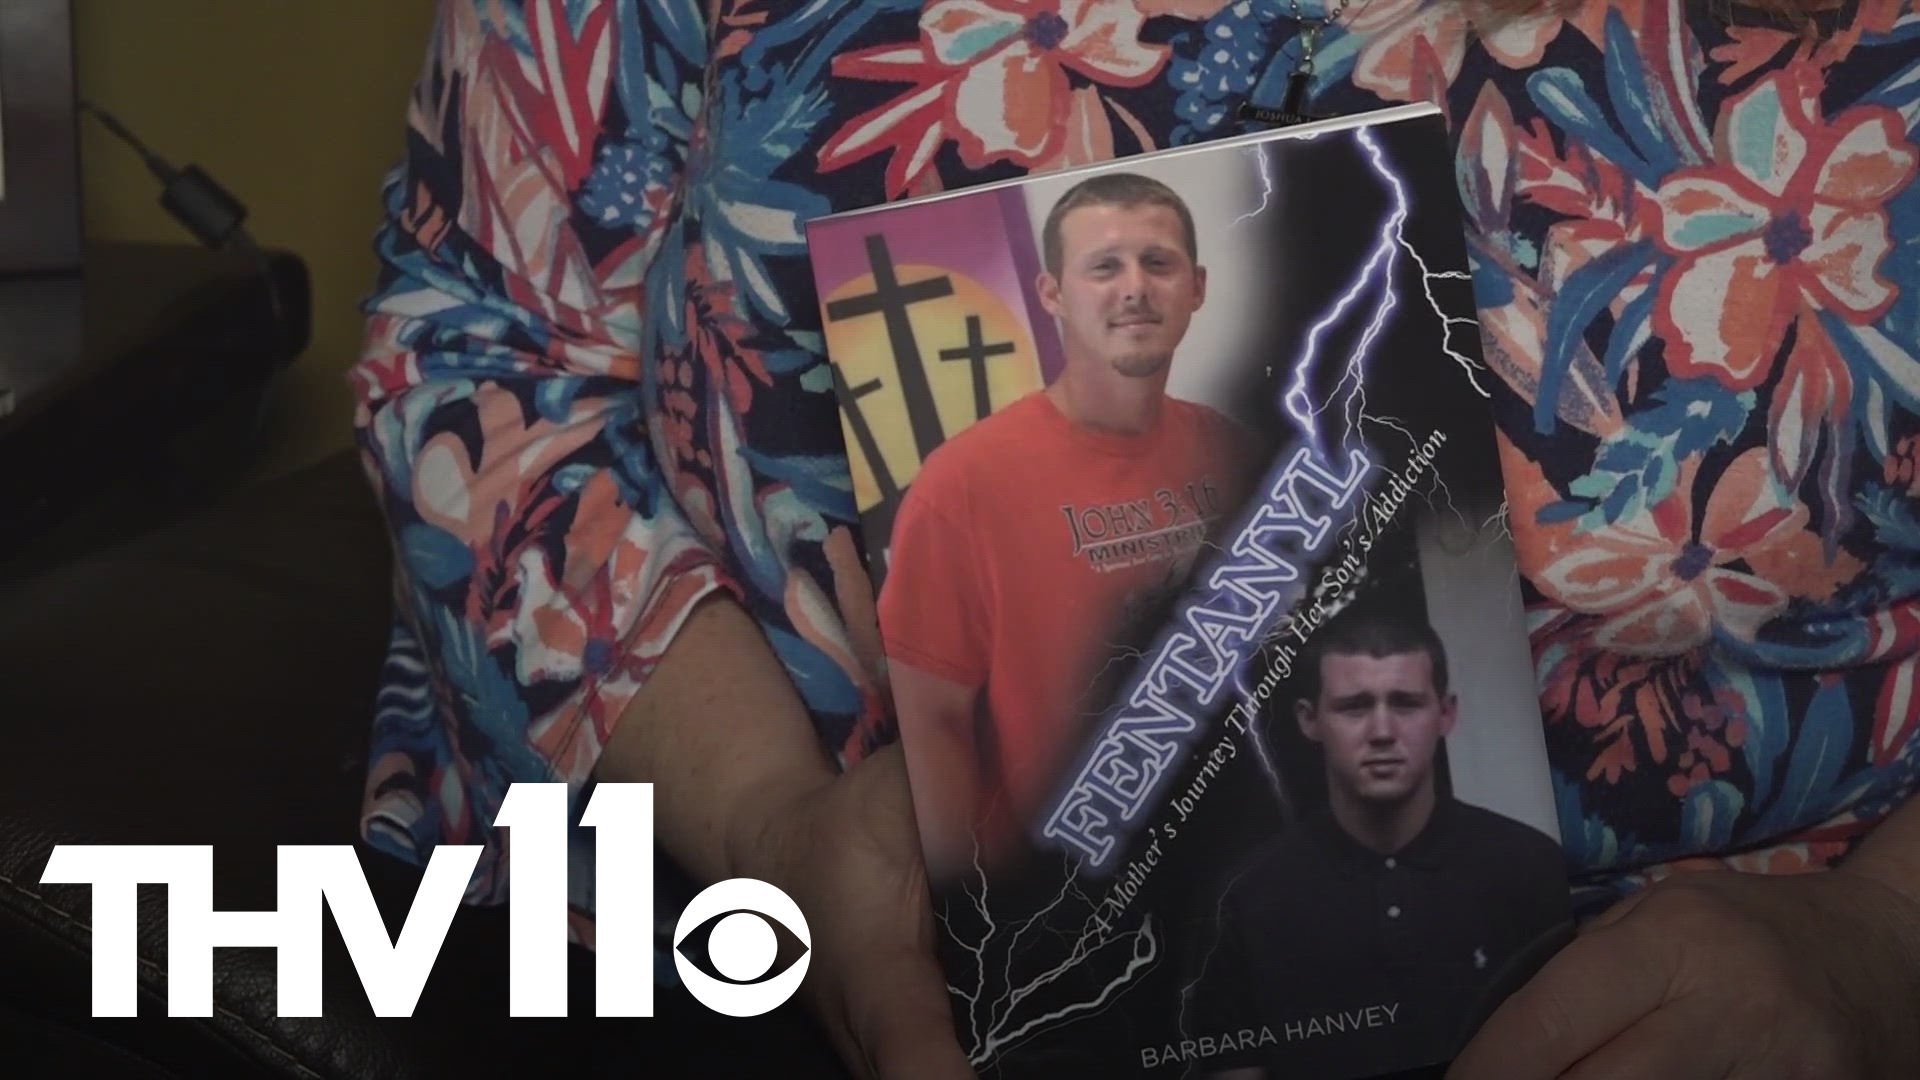 An Arkansas mother is hoping to save a generation by spreading awareness about men’s mental health after losing her son.